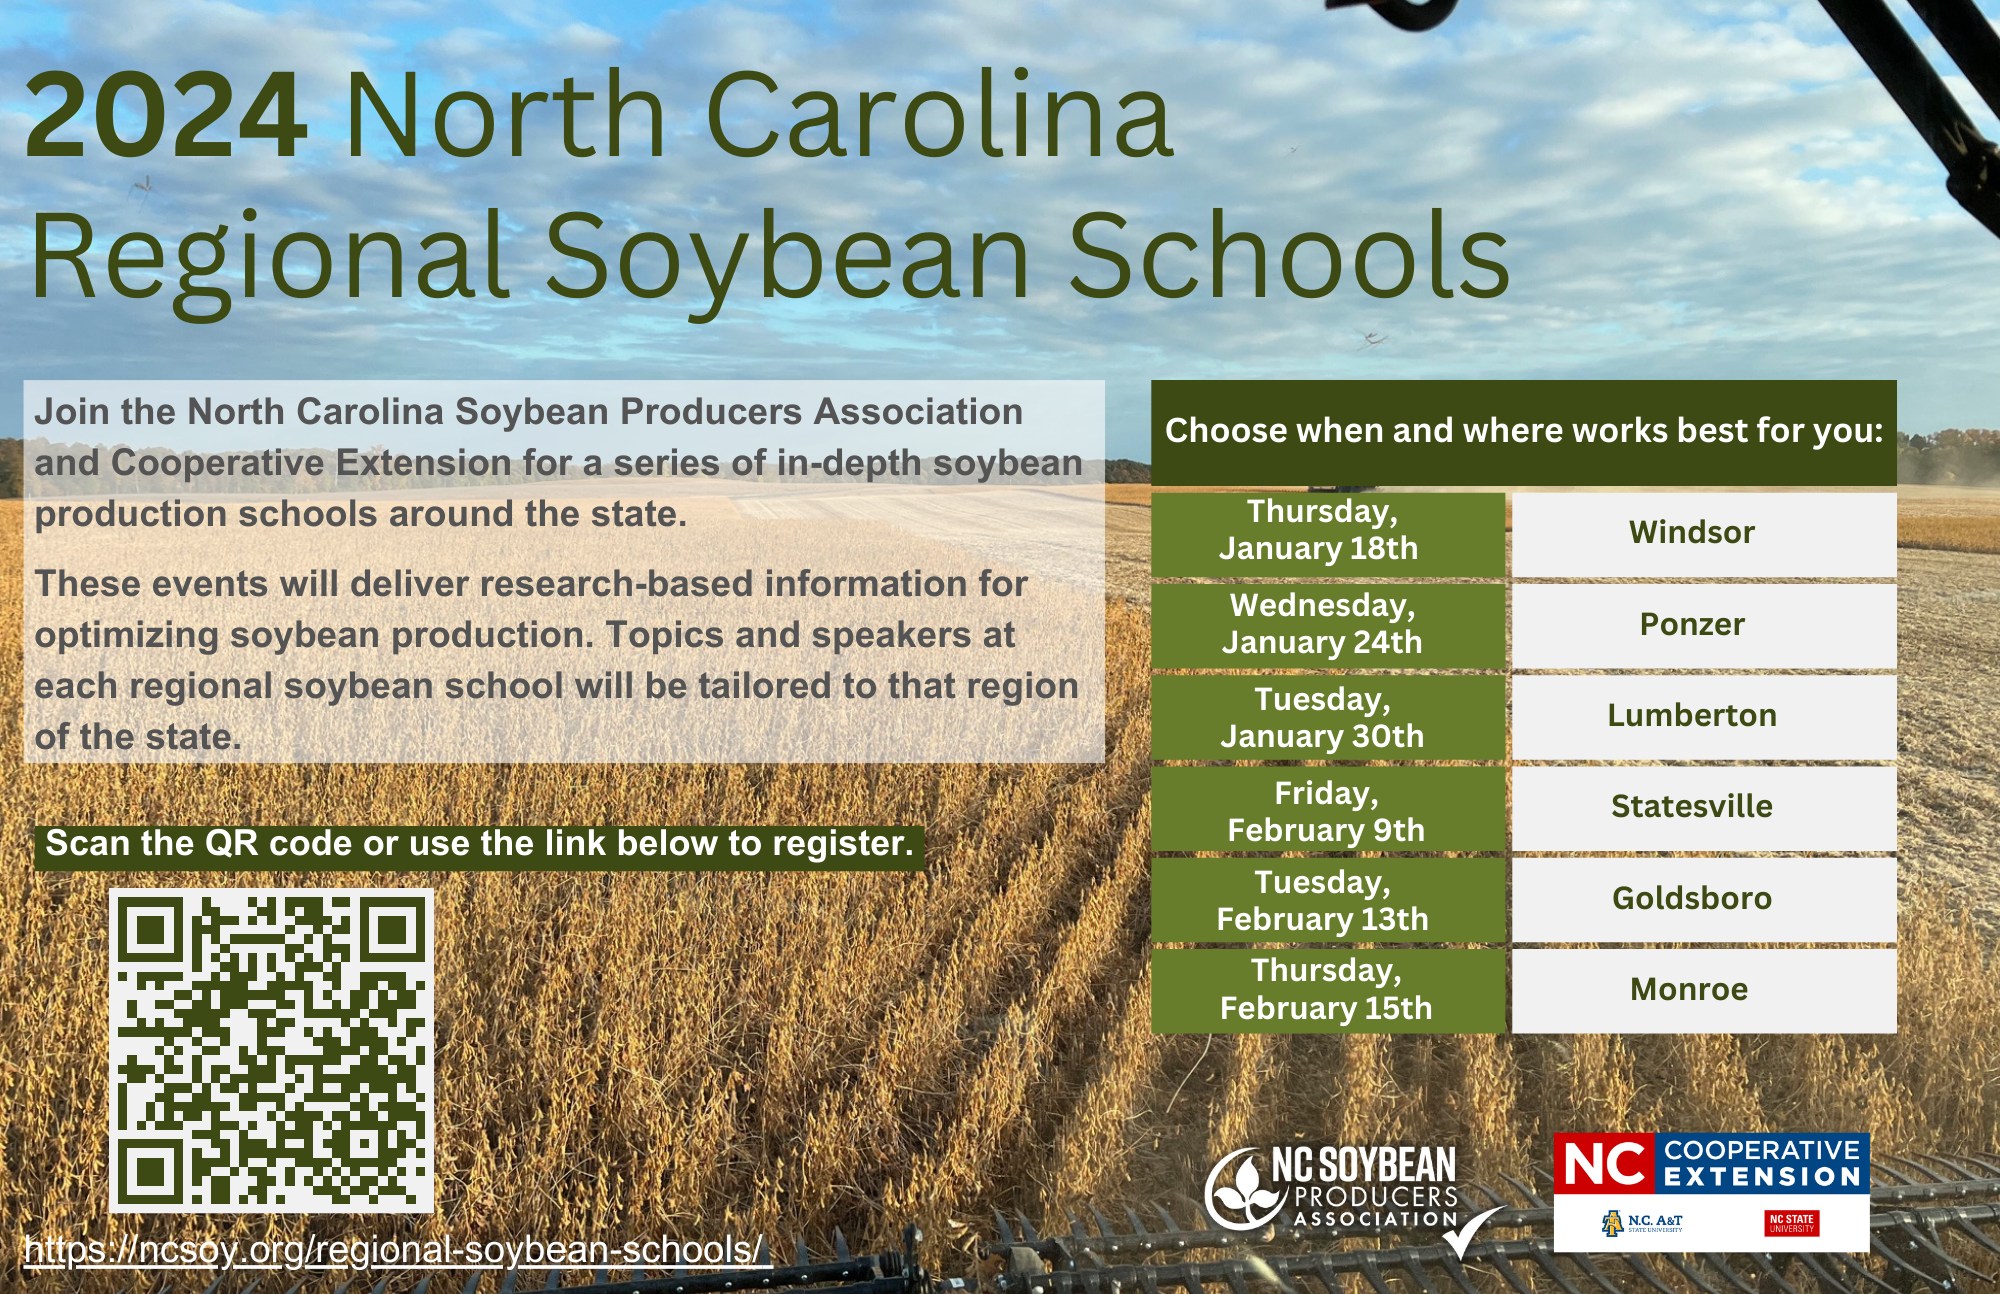 2024 NC Soybean Schools: Thursday January 18th-Windsor, Wednesday January 24th-Ponzer, Tuesday January 30th-Lumberton, Friday February 9th-Statesville, Tuesday February 13th-Goldsboro, Thursday February 15th-Monroe.